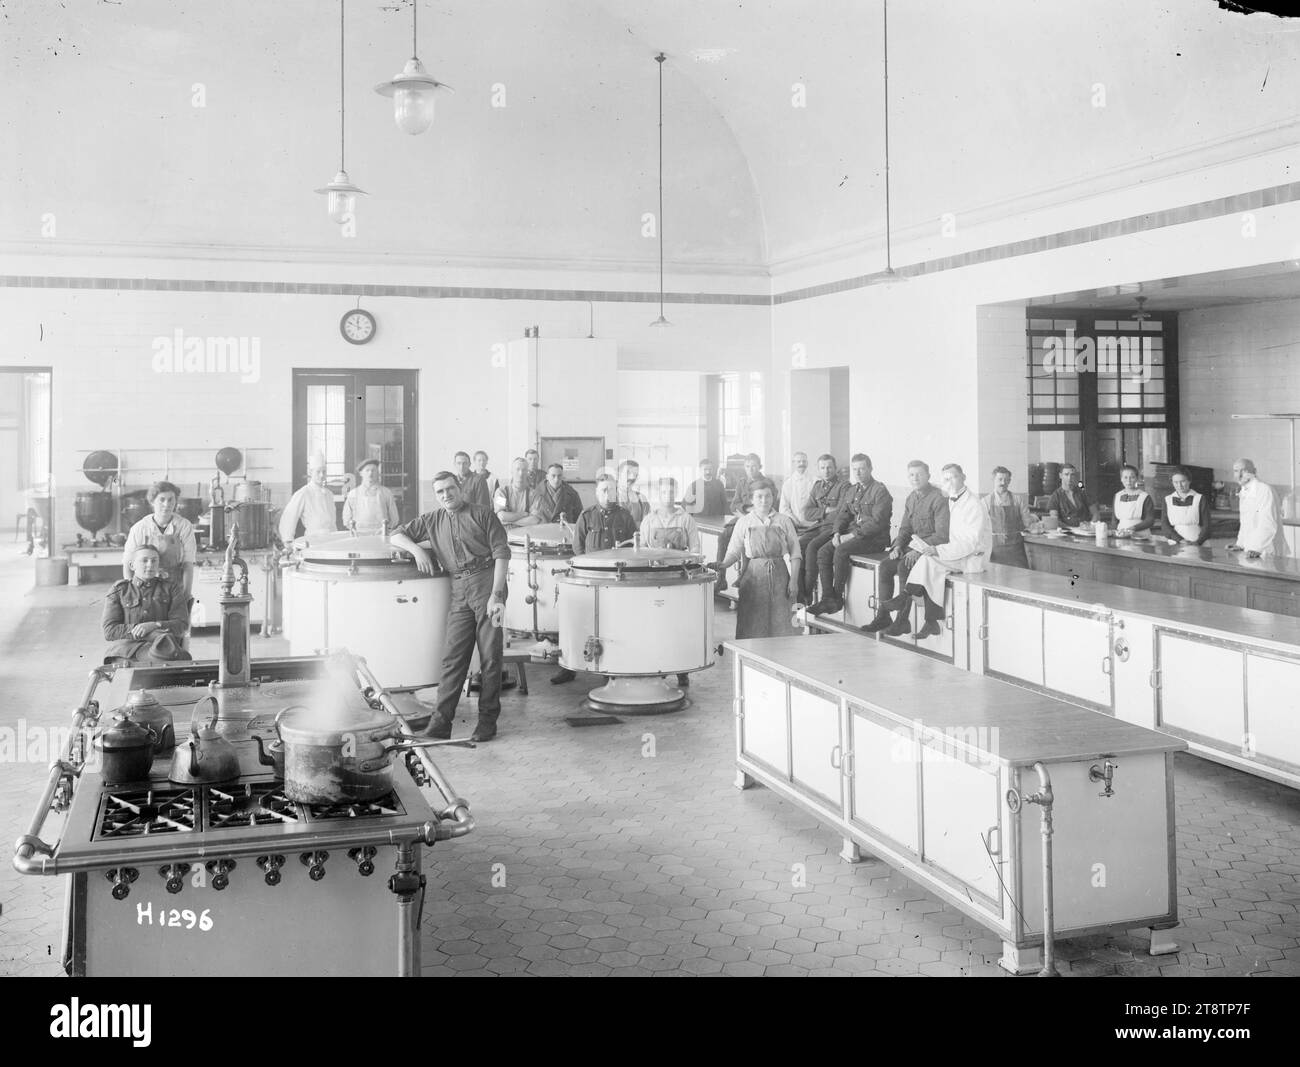 The German kitchen at the dye works used by New Zealand Divisional Headquarters, Leverkusen, Germany, Interior view of the German kitchen in the dye works at Leverkusen, Germany, used by the New Zealand Divisional Headquarters during the allied occupation after World War I. Shows a number of civilians in the vast kitchen who pose for the camera. Photograph taken March 1919 Stock Photo